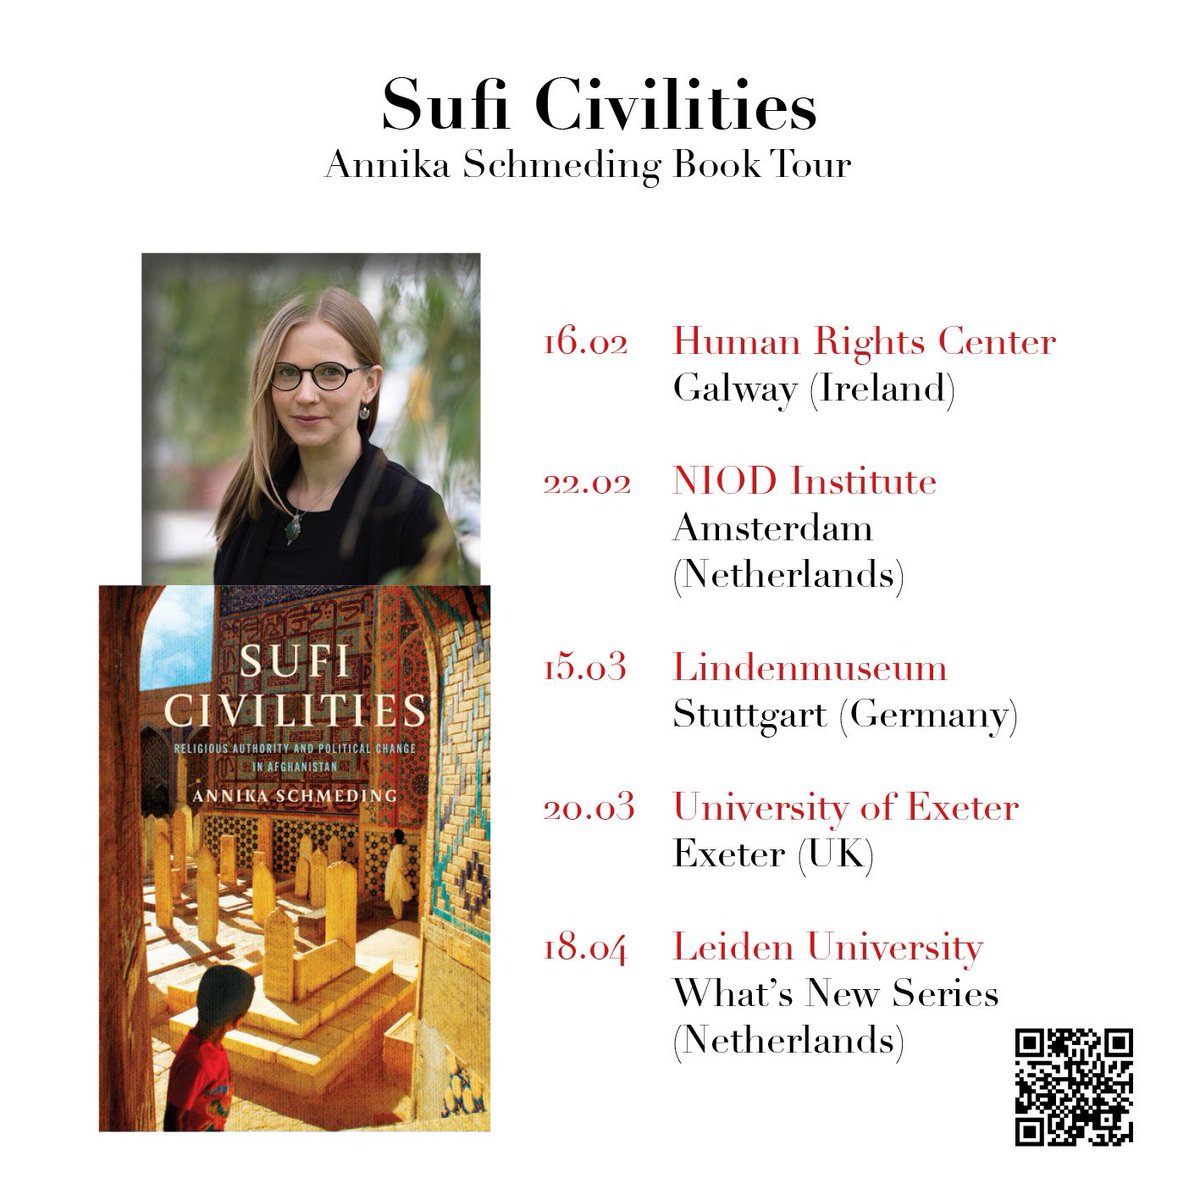 After two excellent discussions in Amsterdam and Galway, I look forward to the coming weeks in Germany and the UK! Train tickets are booked and I’m counting the days. Let me know if you’re around! #SufiCivilities @stanfordpress #booklaunch #bookevent